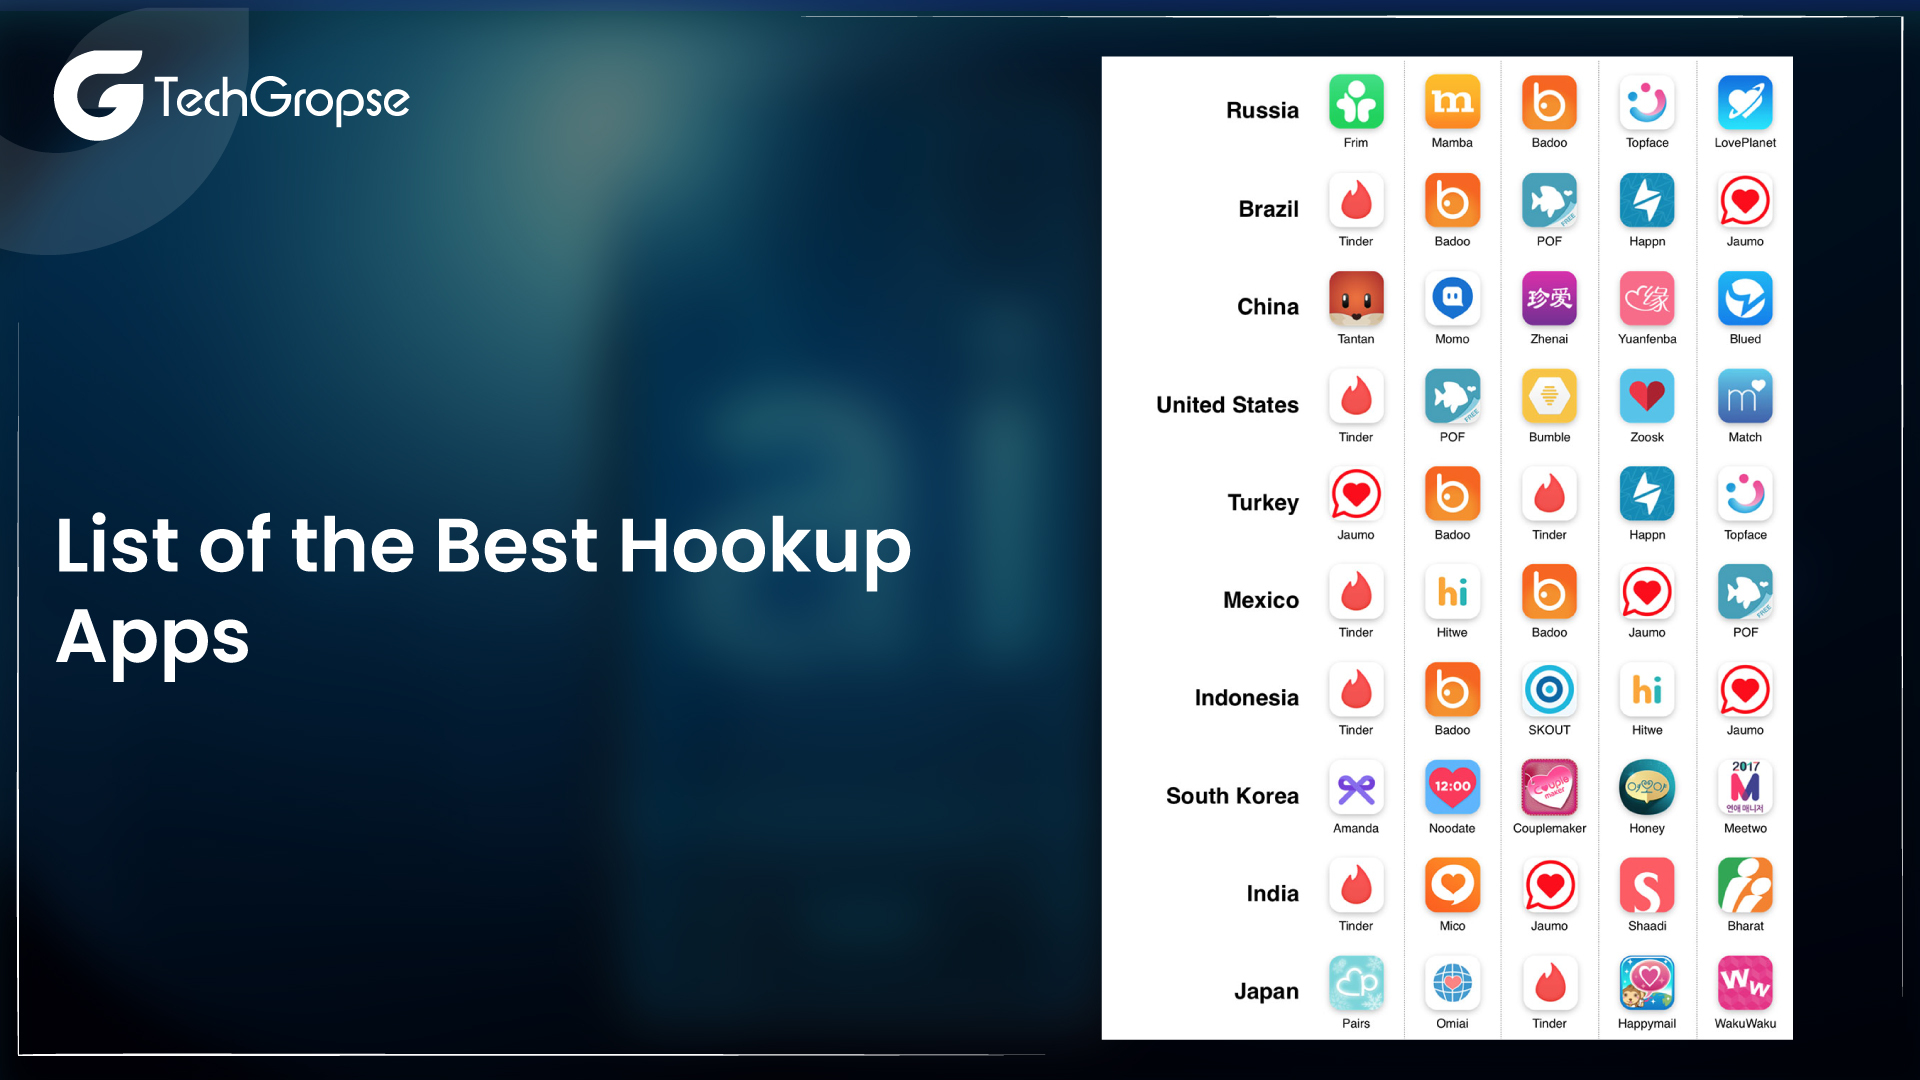 List of the Best Hookup Apps